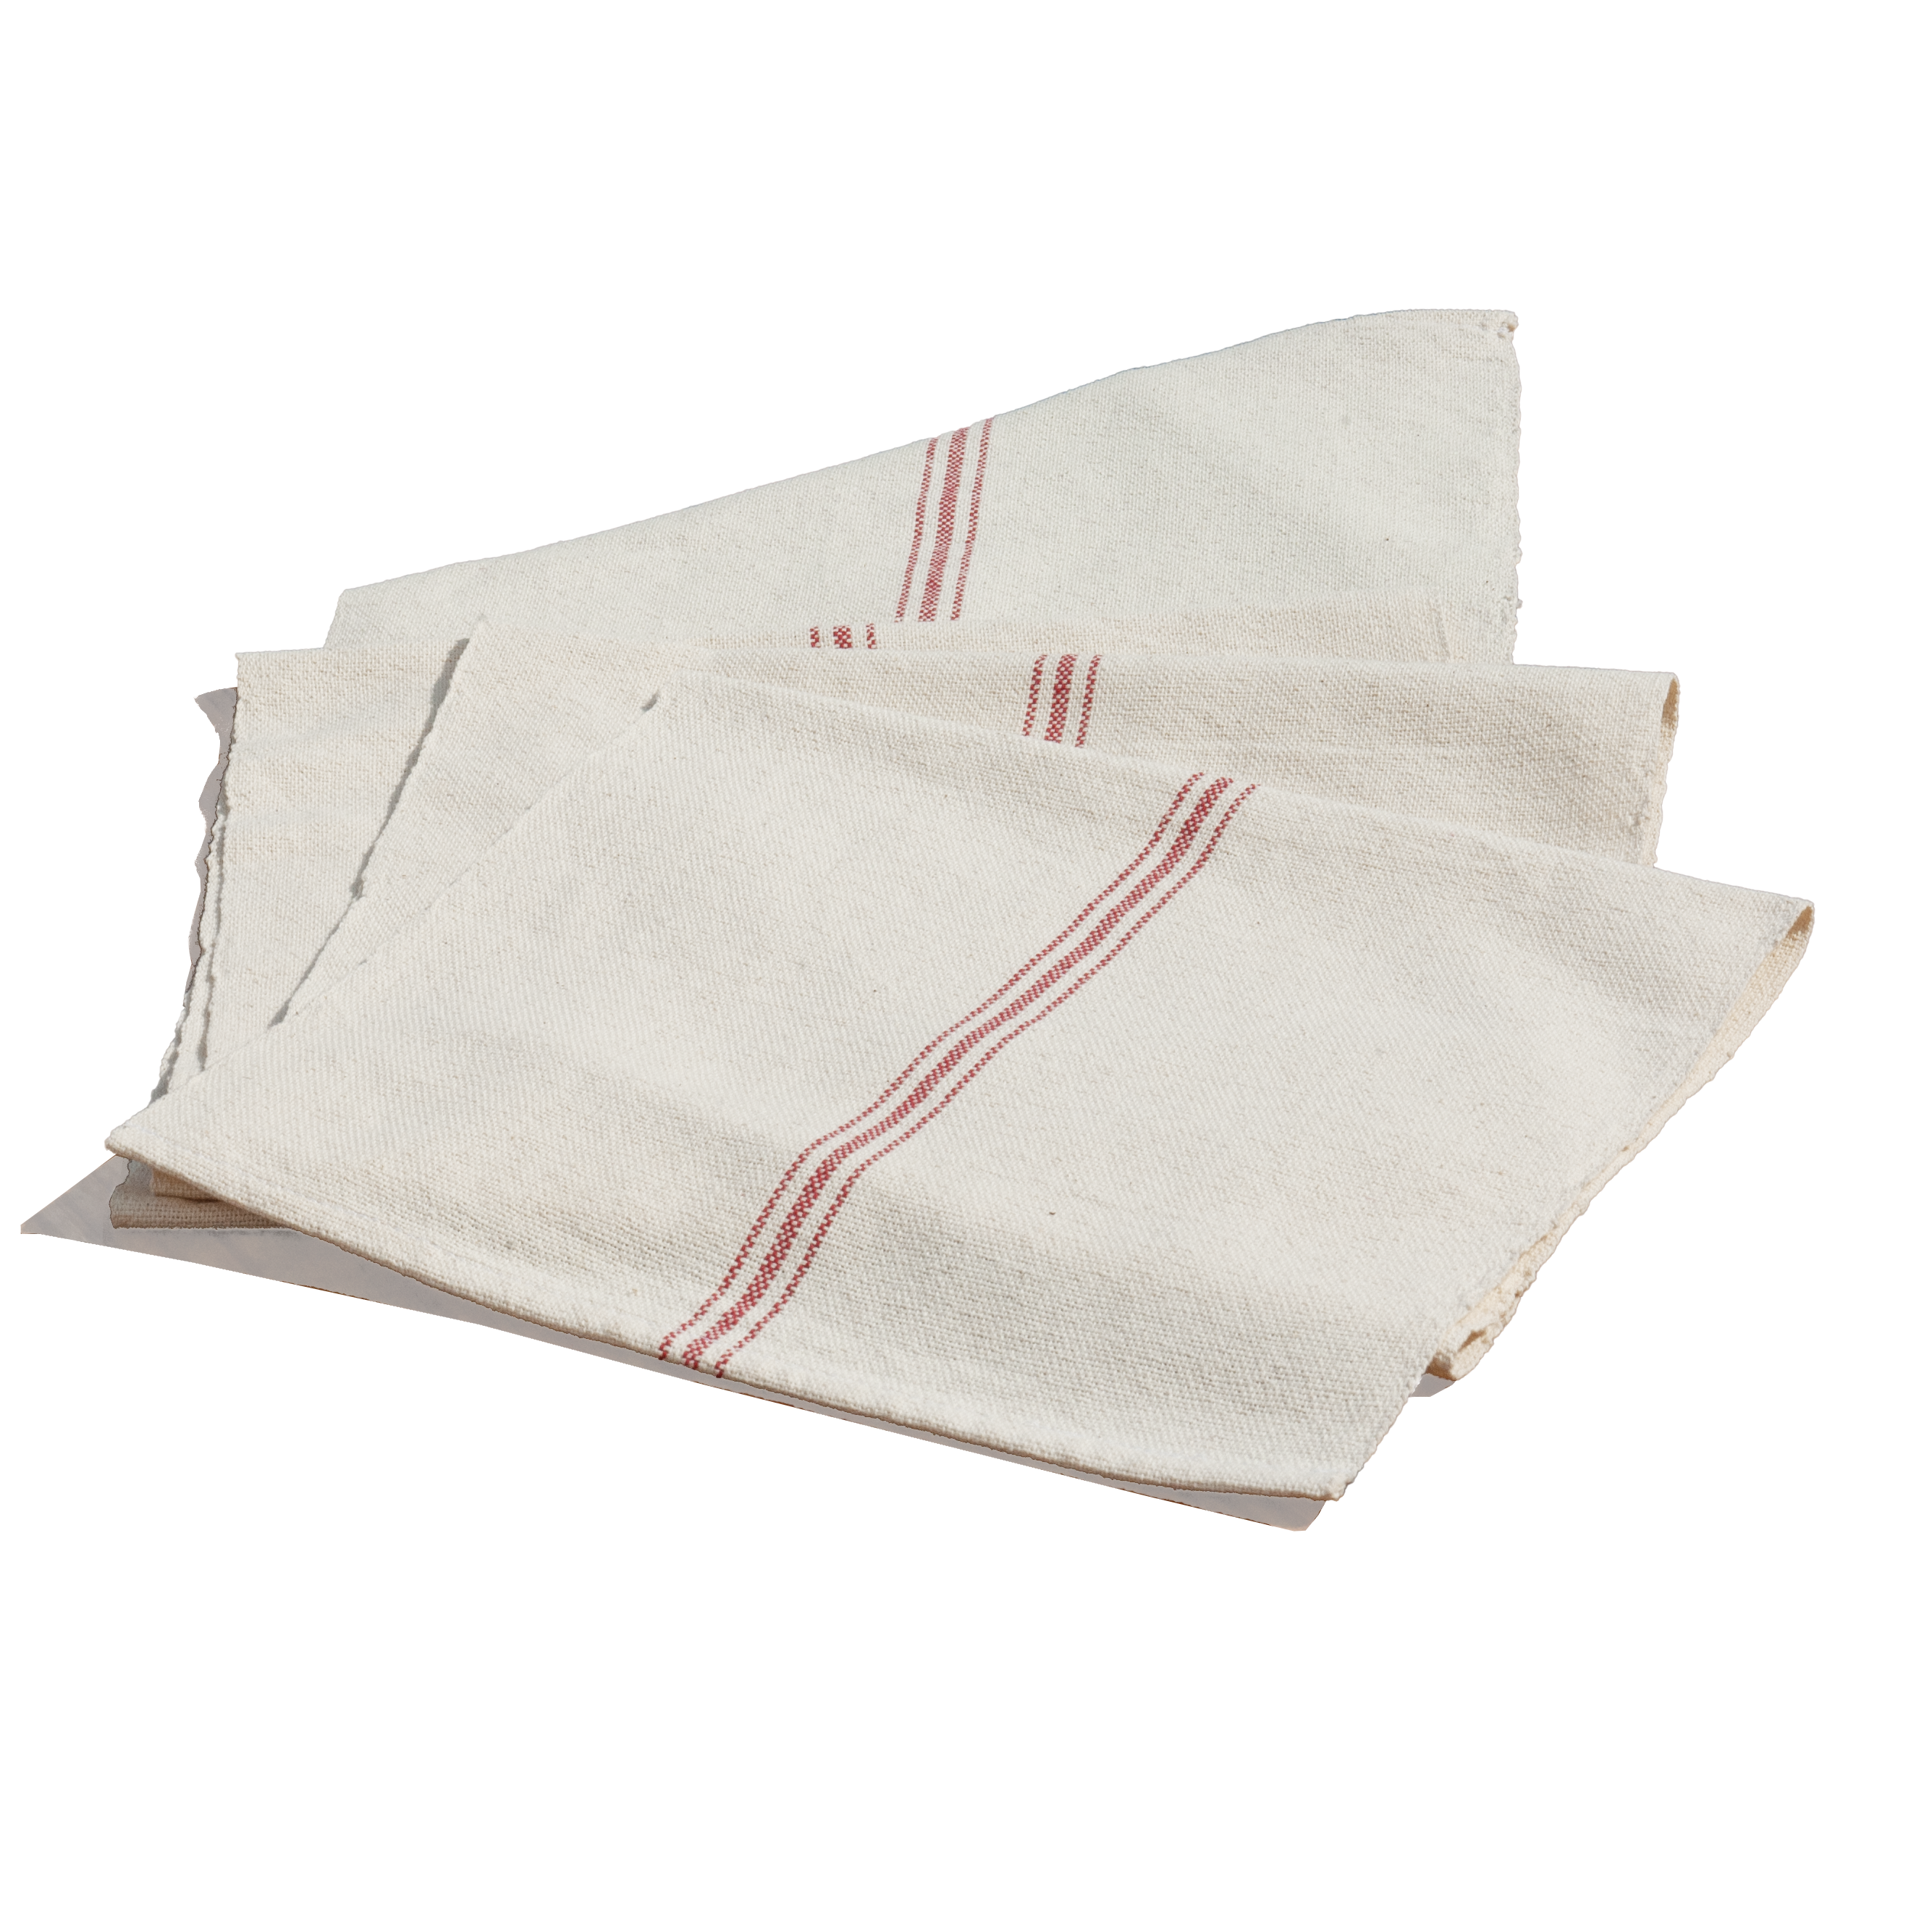 Tejate Cotton Table Runner